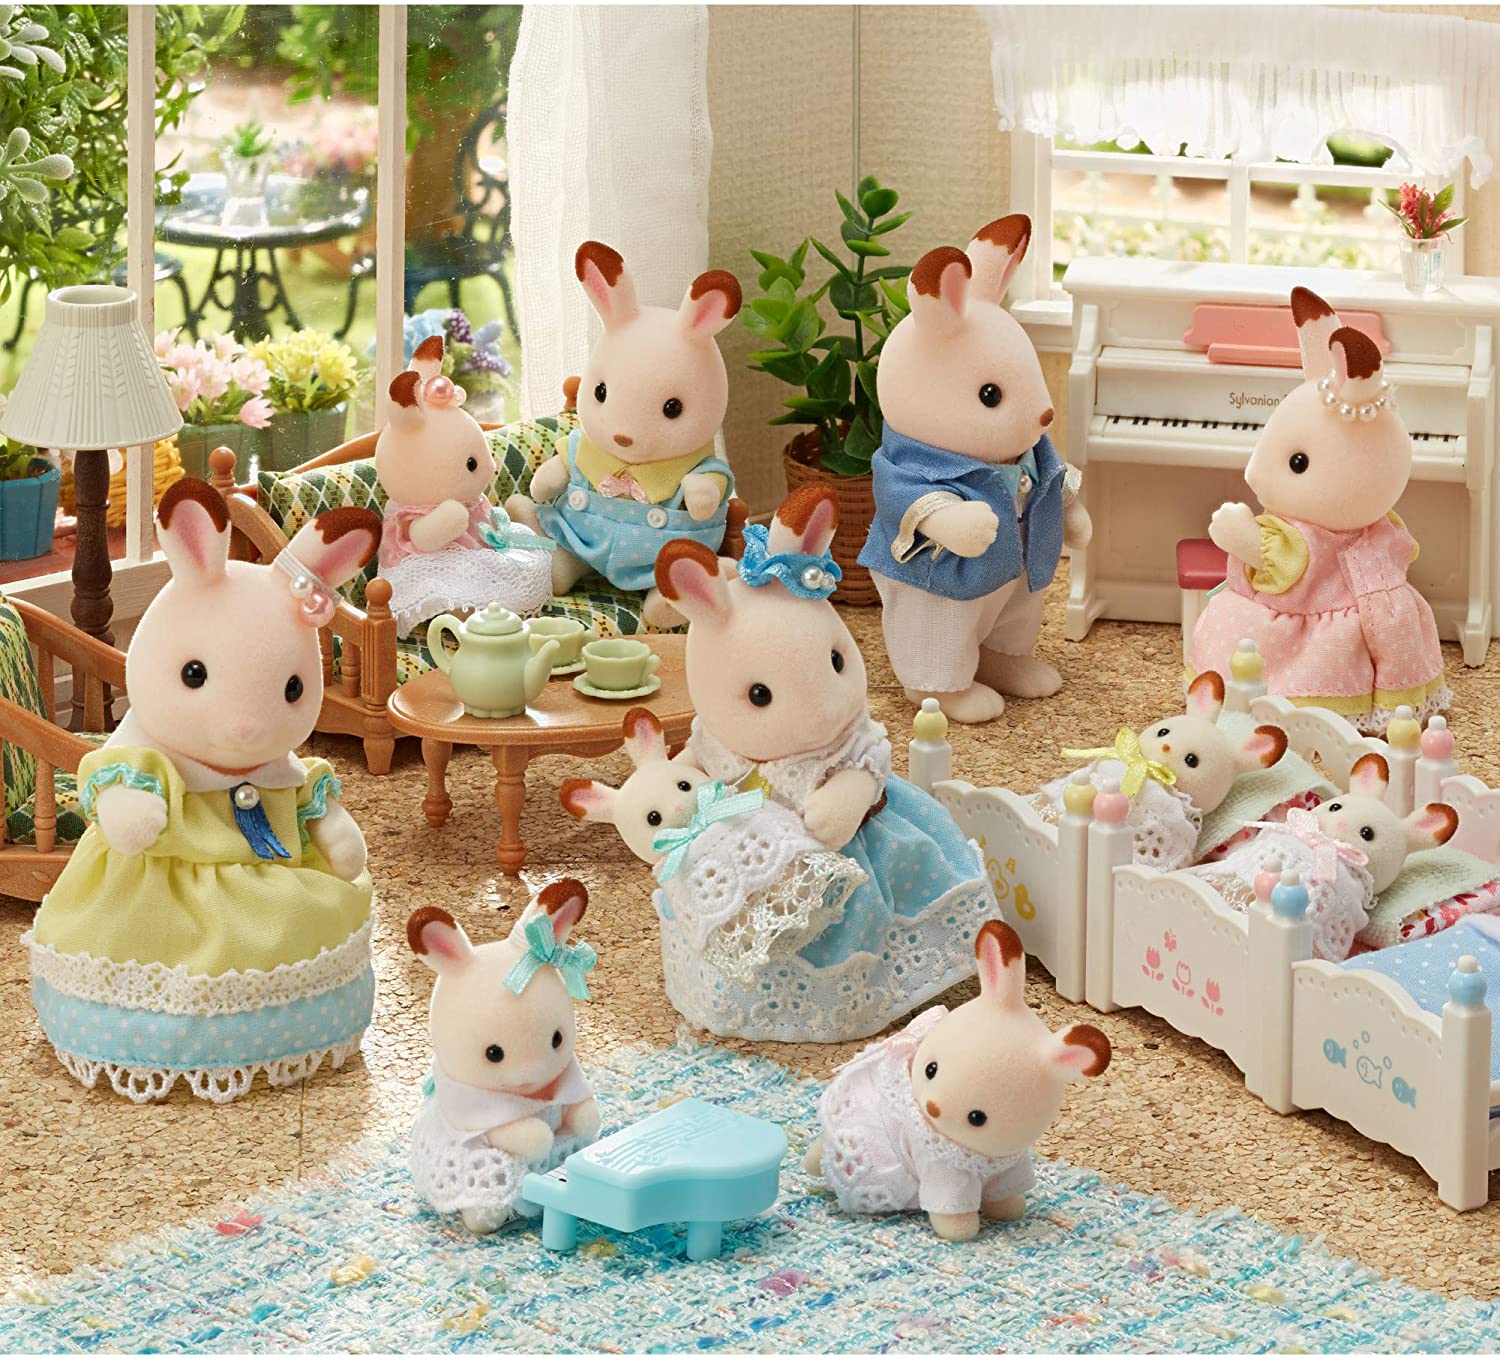 Sylvanian Families Calico Critters 35th Anniversary Celebration Babies Set 